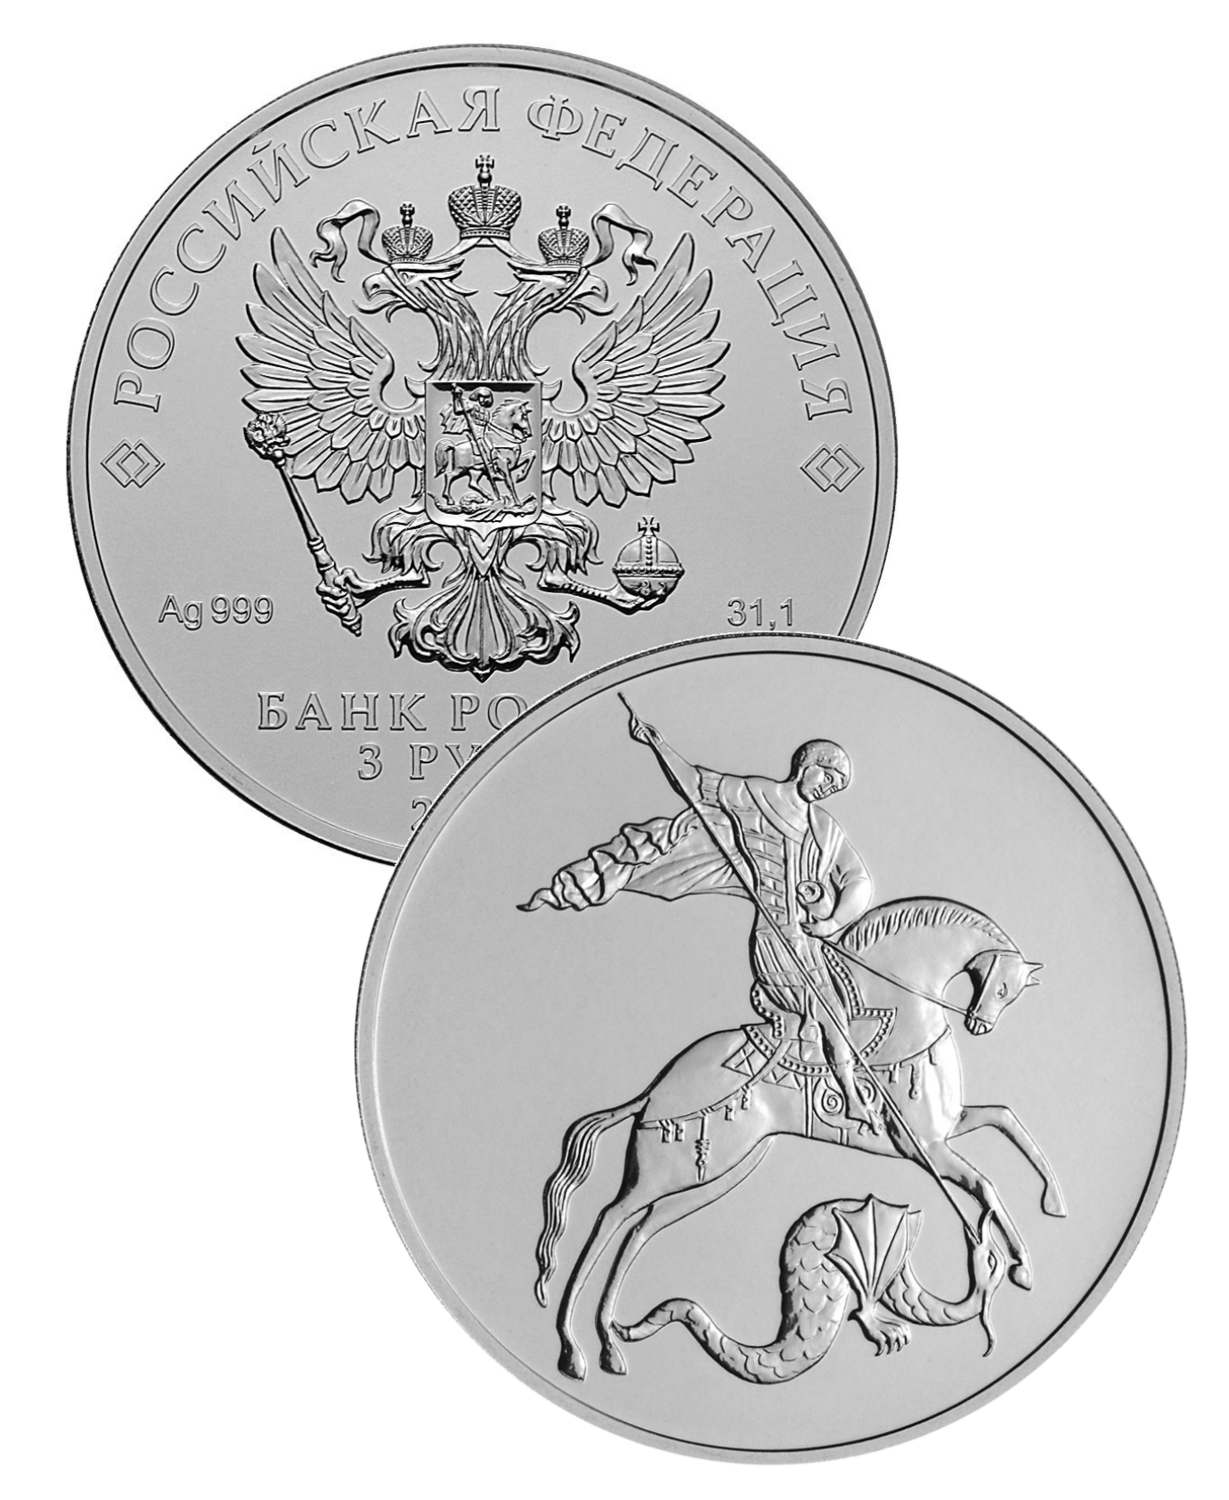 Russia. 2020. 3 Rubles. SPMD. George the Victorious. 0.999 Silver 1.00 Oz, ASW., 31.50 g. UNC. Mintage: <300,000